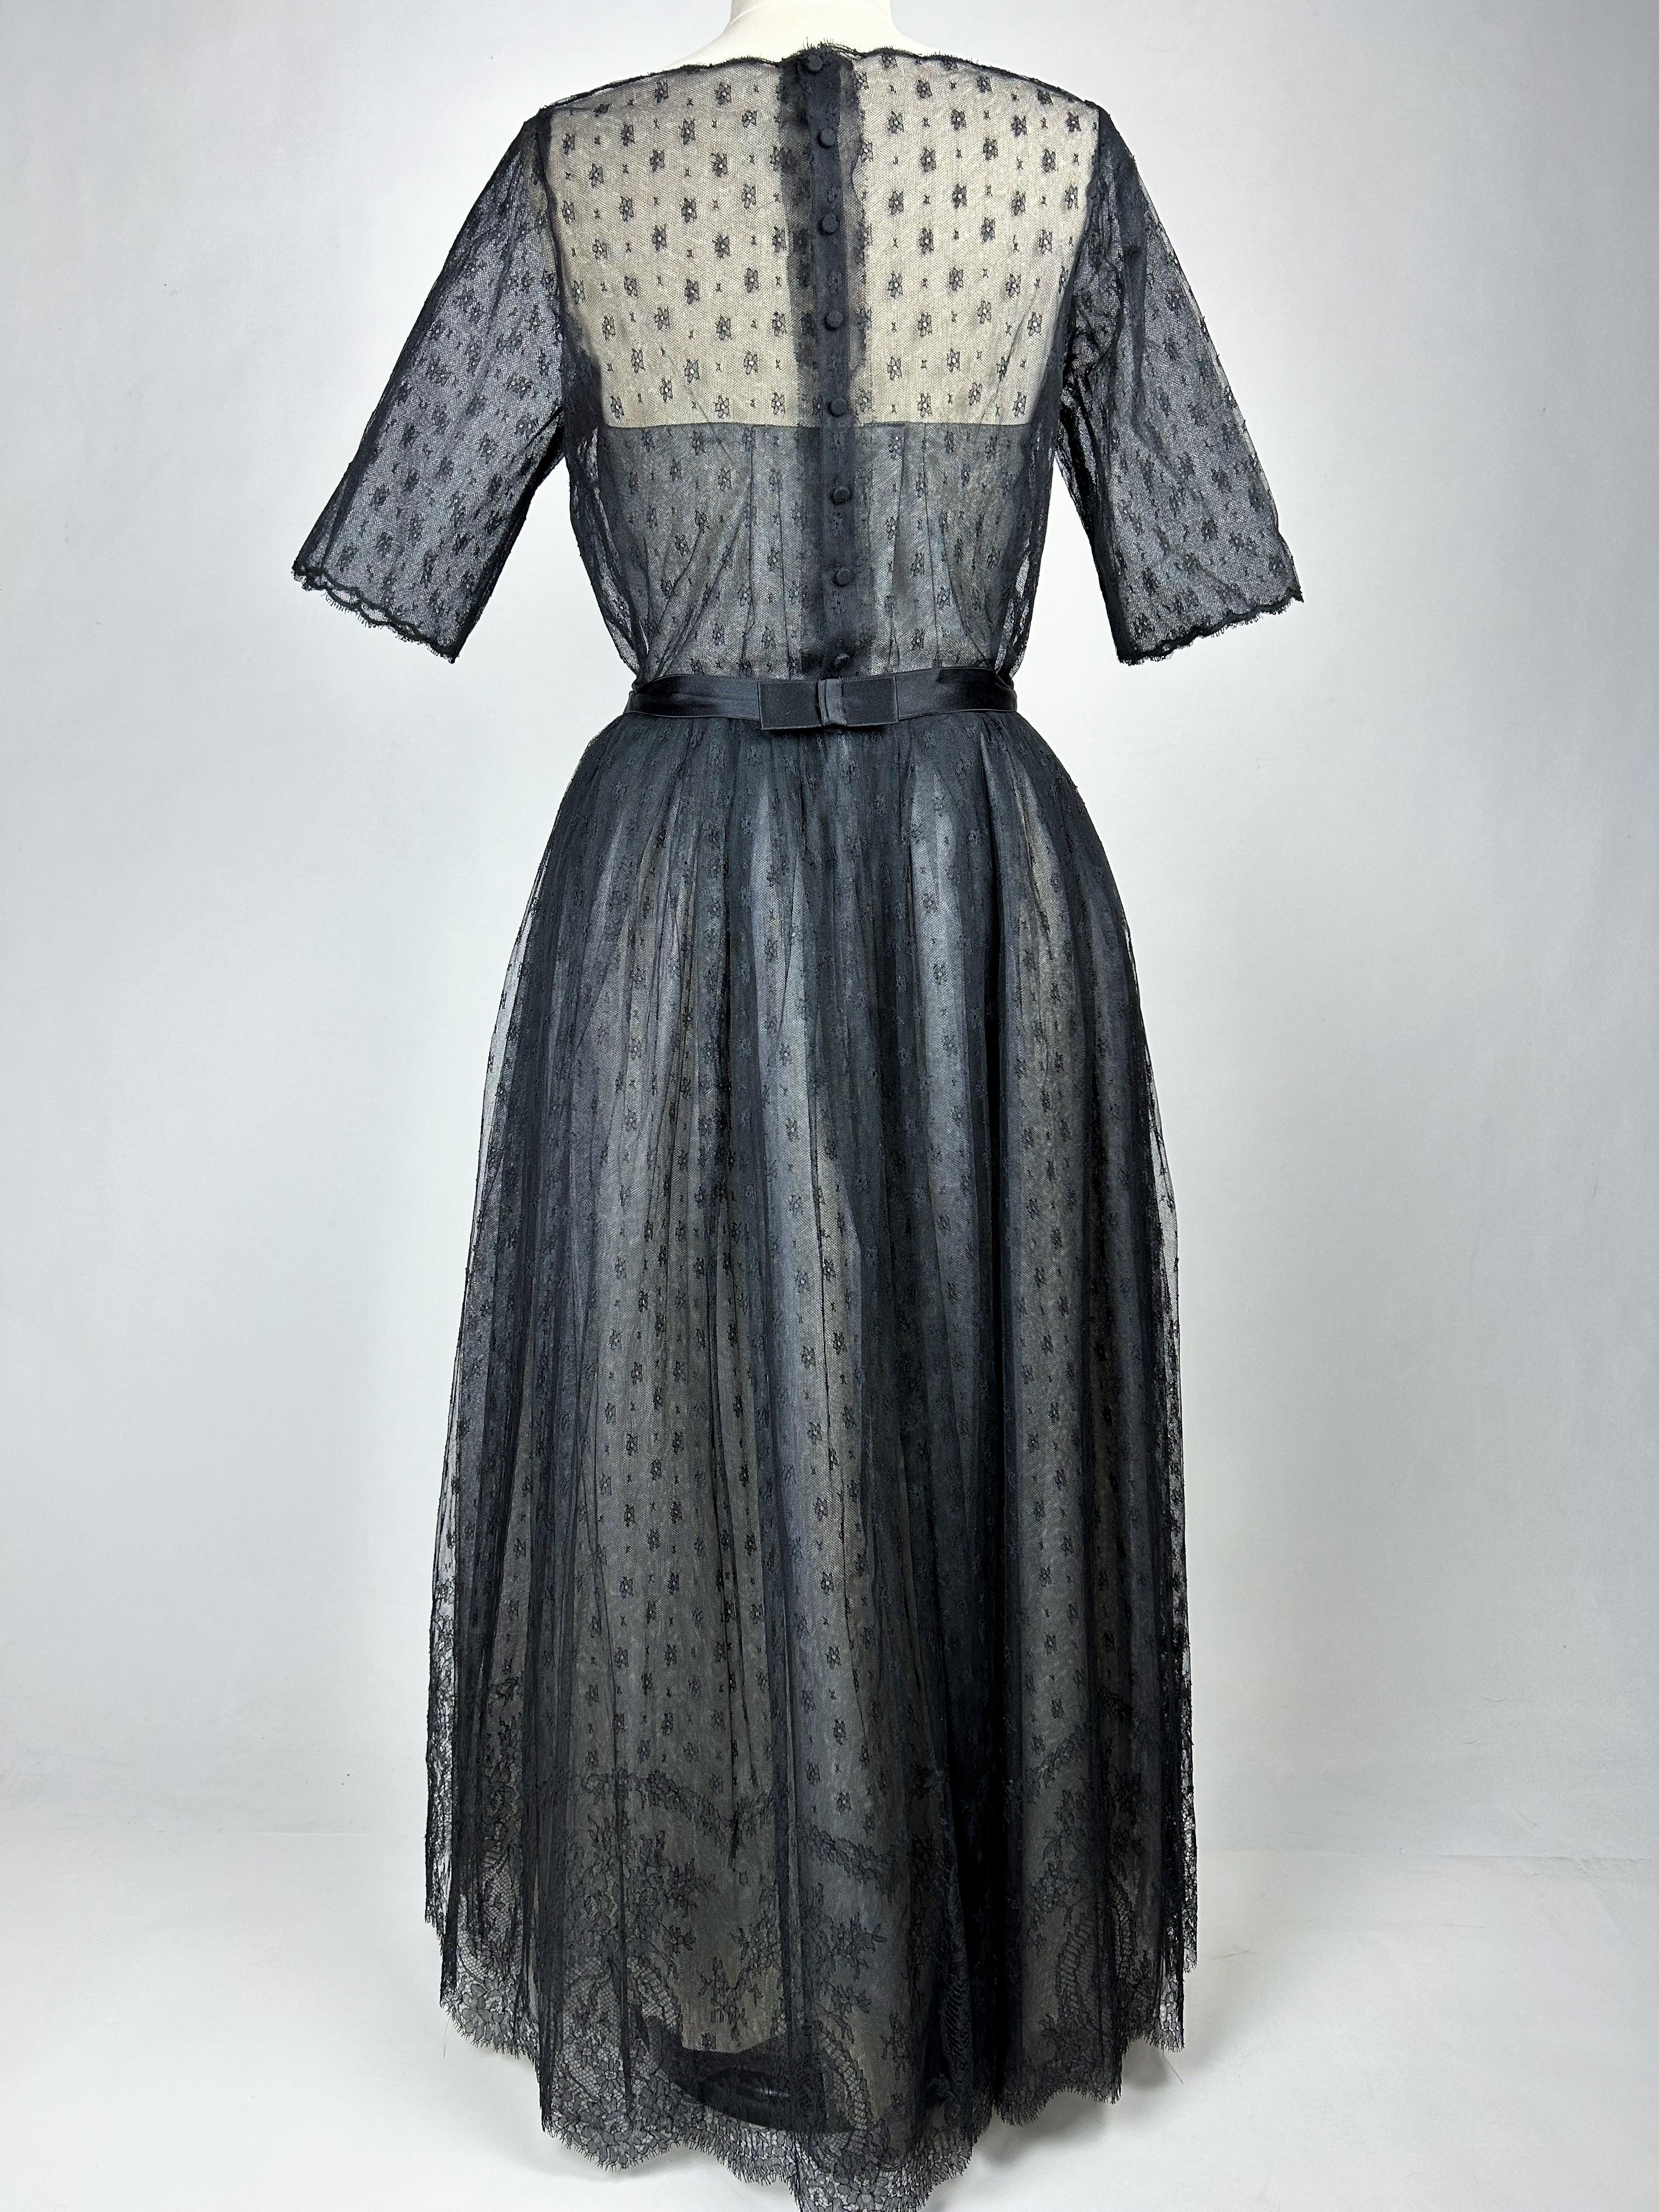 Christian Dior/Saint Laurent Couture Lace Dress (attributed to) Almaviva C.1960 5